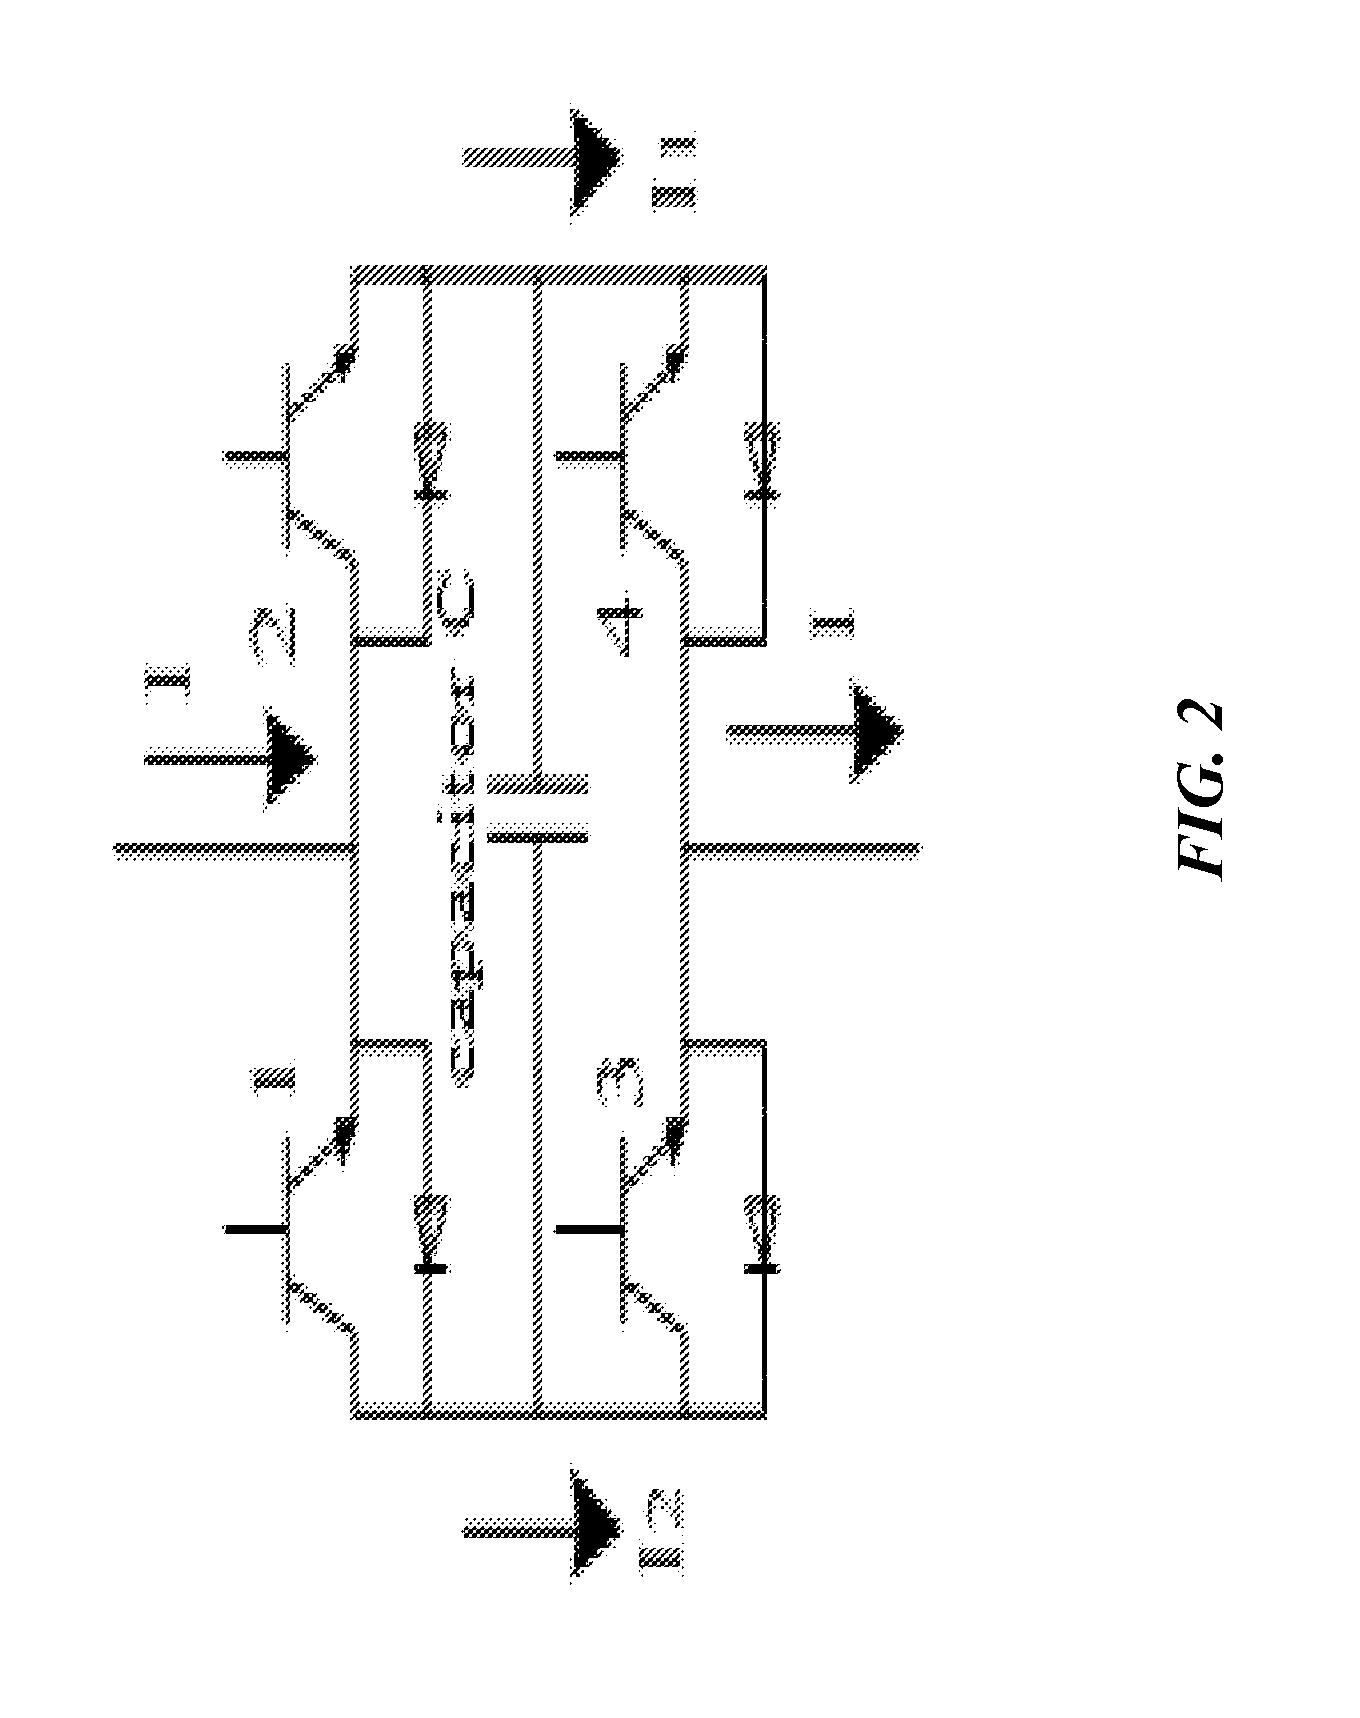 A direct current circuit breaker and its implementation